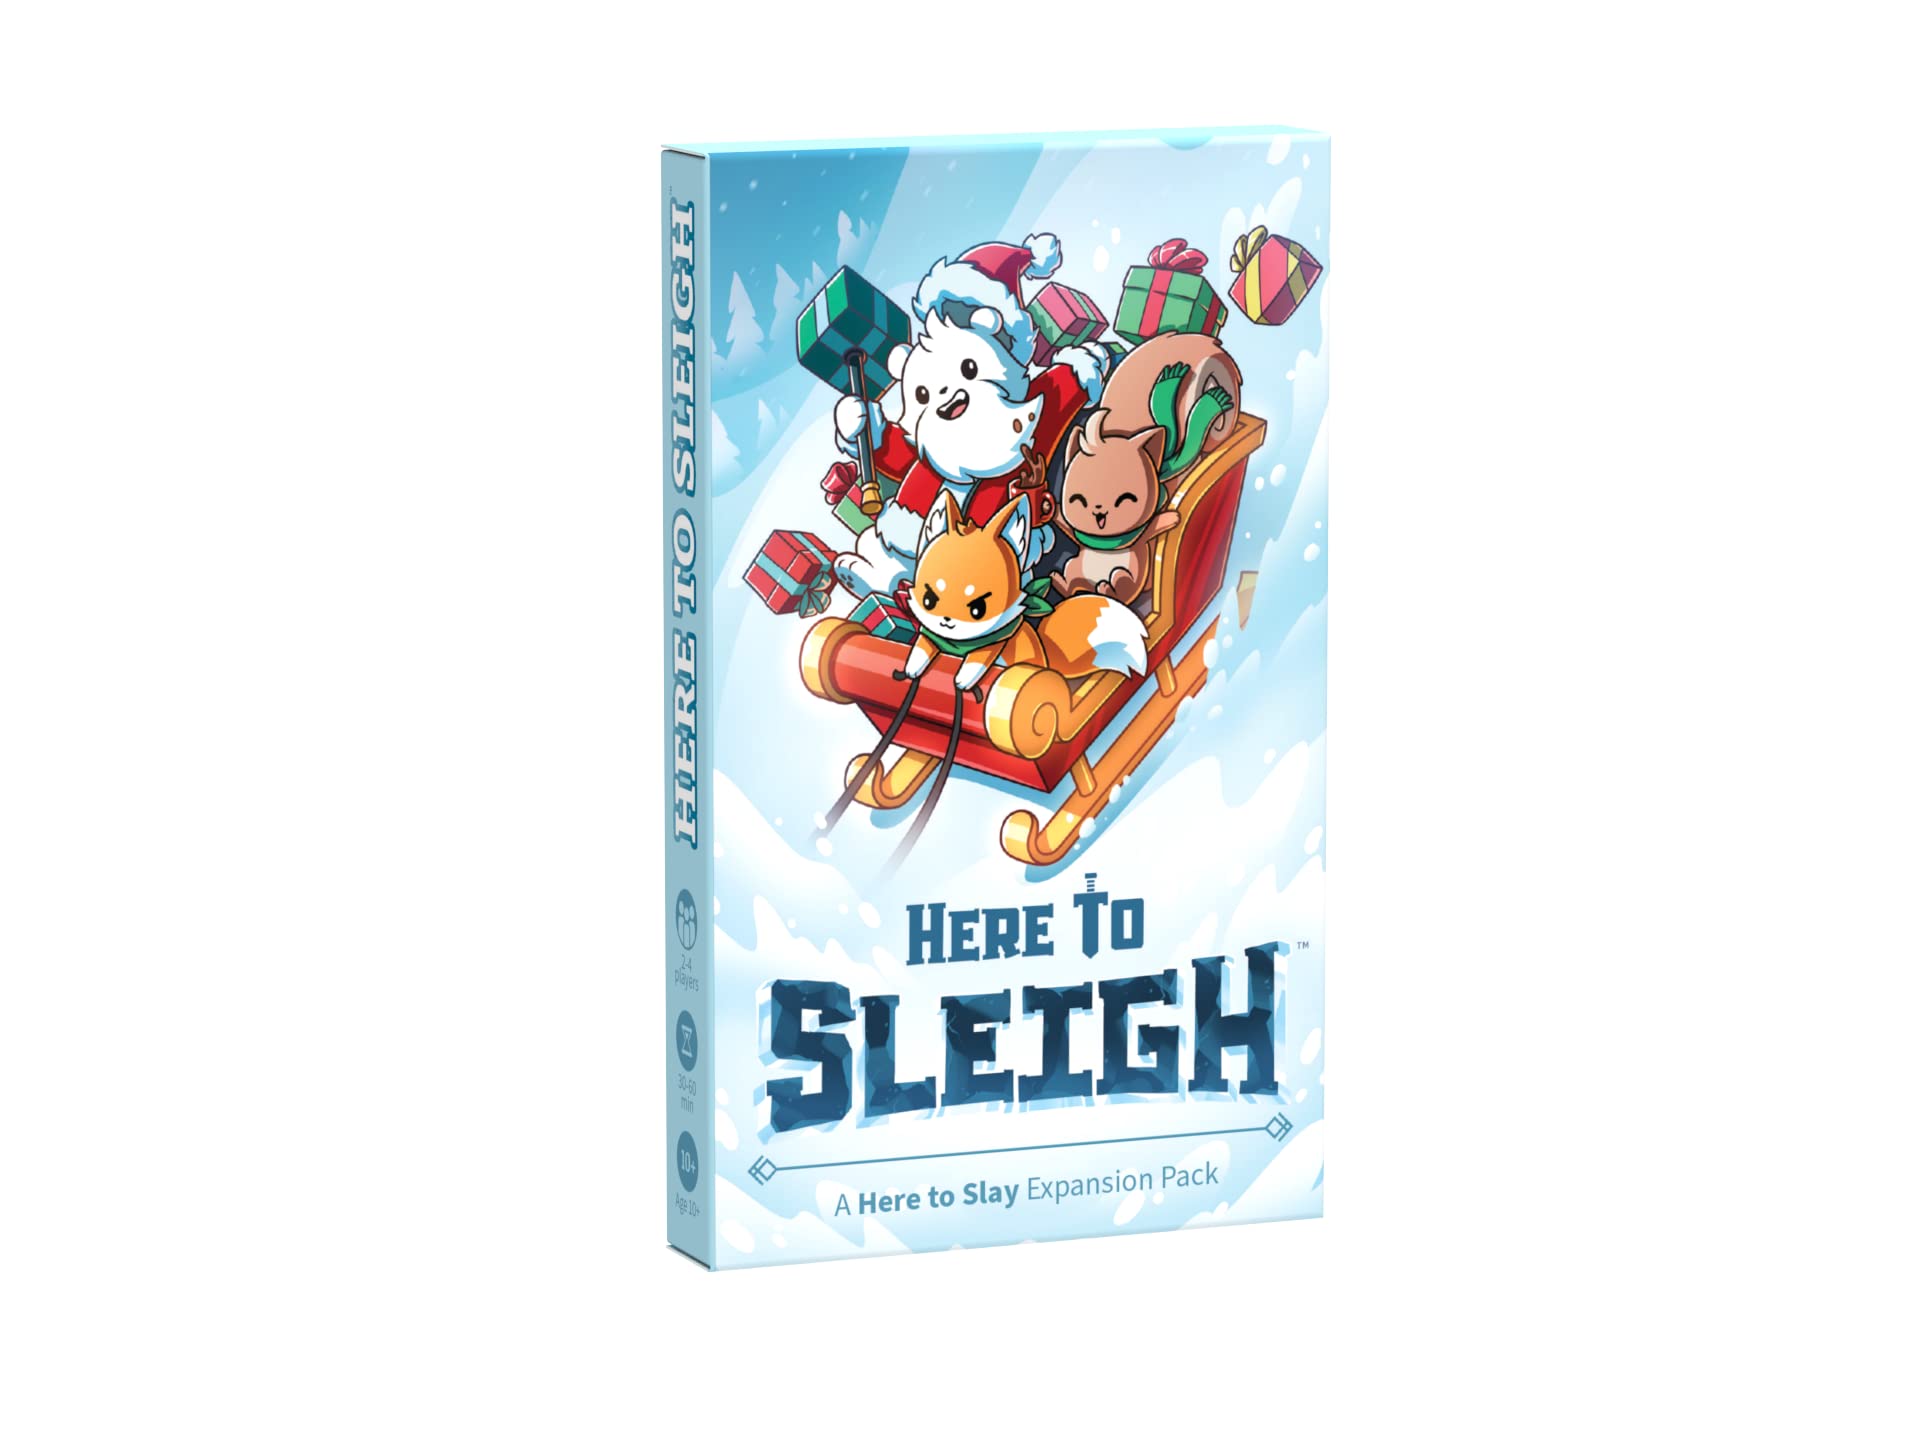 Unstable Games - Here to Slay: Here to Sleigh Holiday Expansion Pack - Strategic role playing card game for kids, teens, & adults - 2-6 players, Ages 10+ - Great for the Holidays